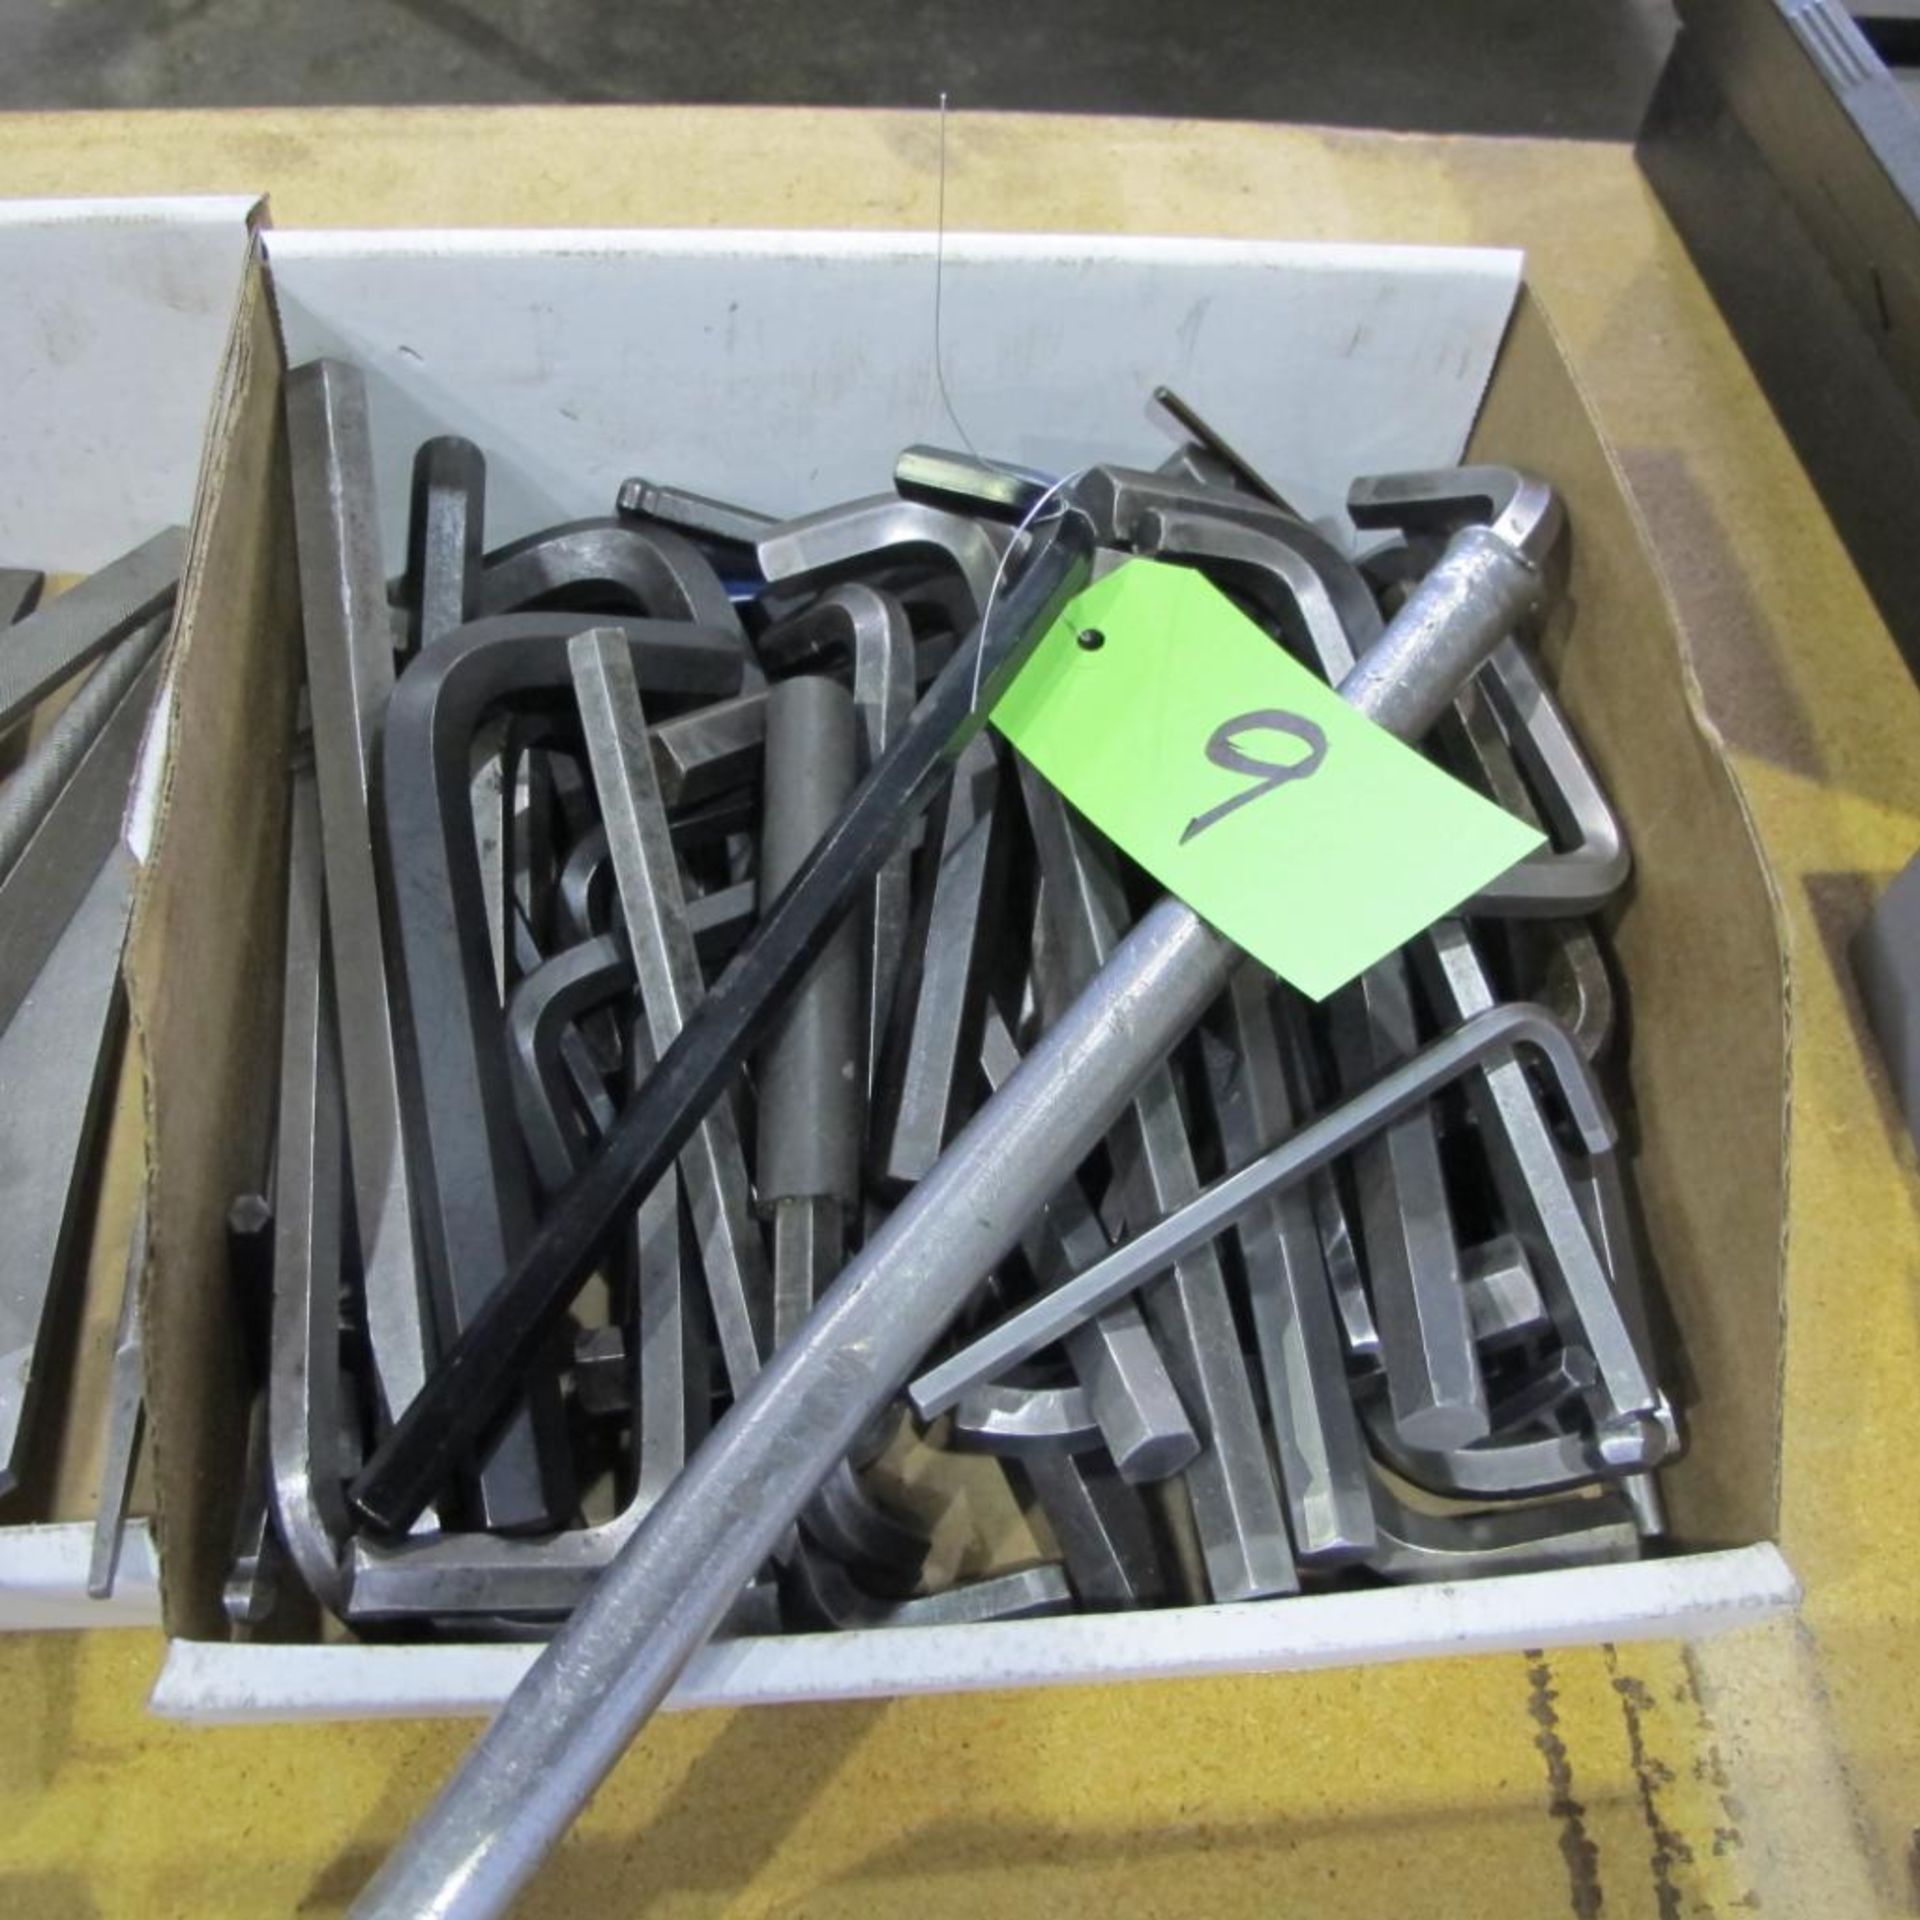 LOT OF 9 BOXES OF HAND TOOLS INCL ALLEN KEYS, FILES, HAMMERS/MALLETS, CUTTERS, CRESCENT WRENCHES DRI - Image 2 of 10